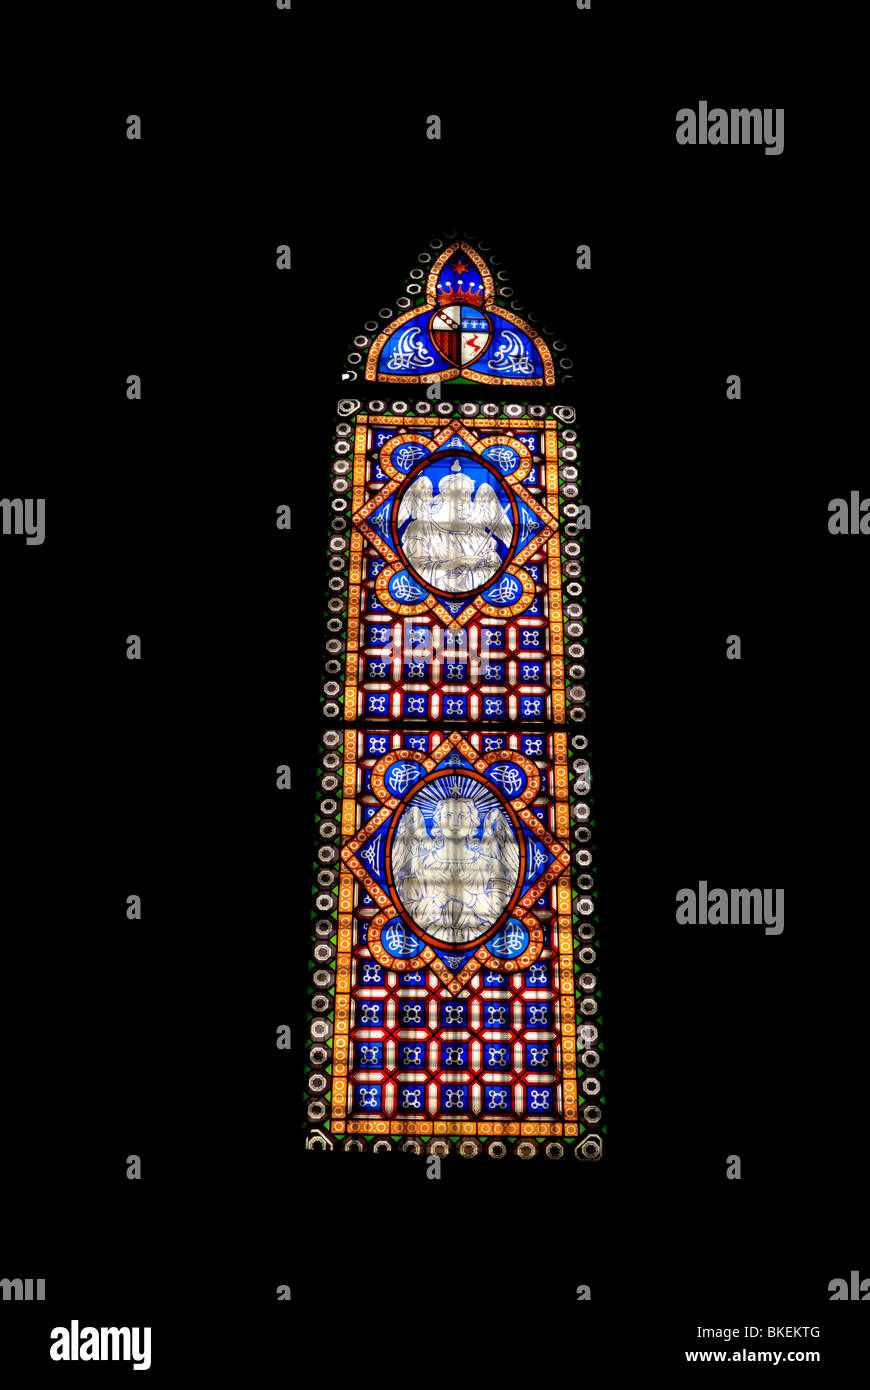 A stained glass window of the Sacristy of the Basilica of San Miniato al Monte. The Basilica of San Miniato al Monte is one of.. Stock Photo